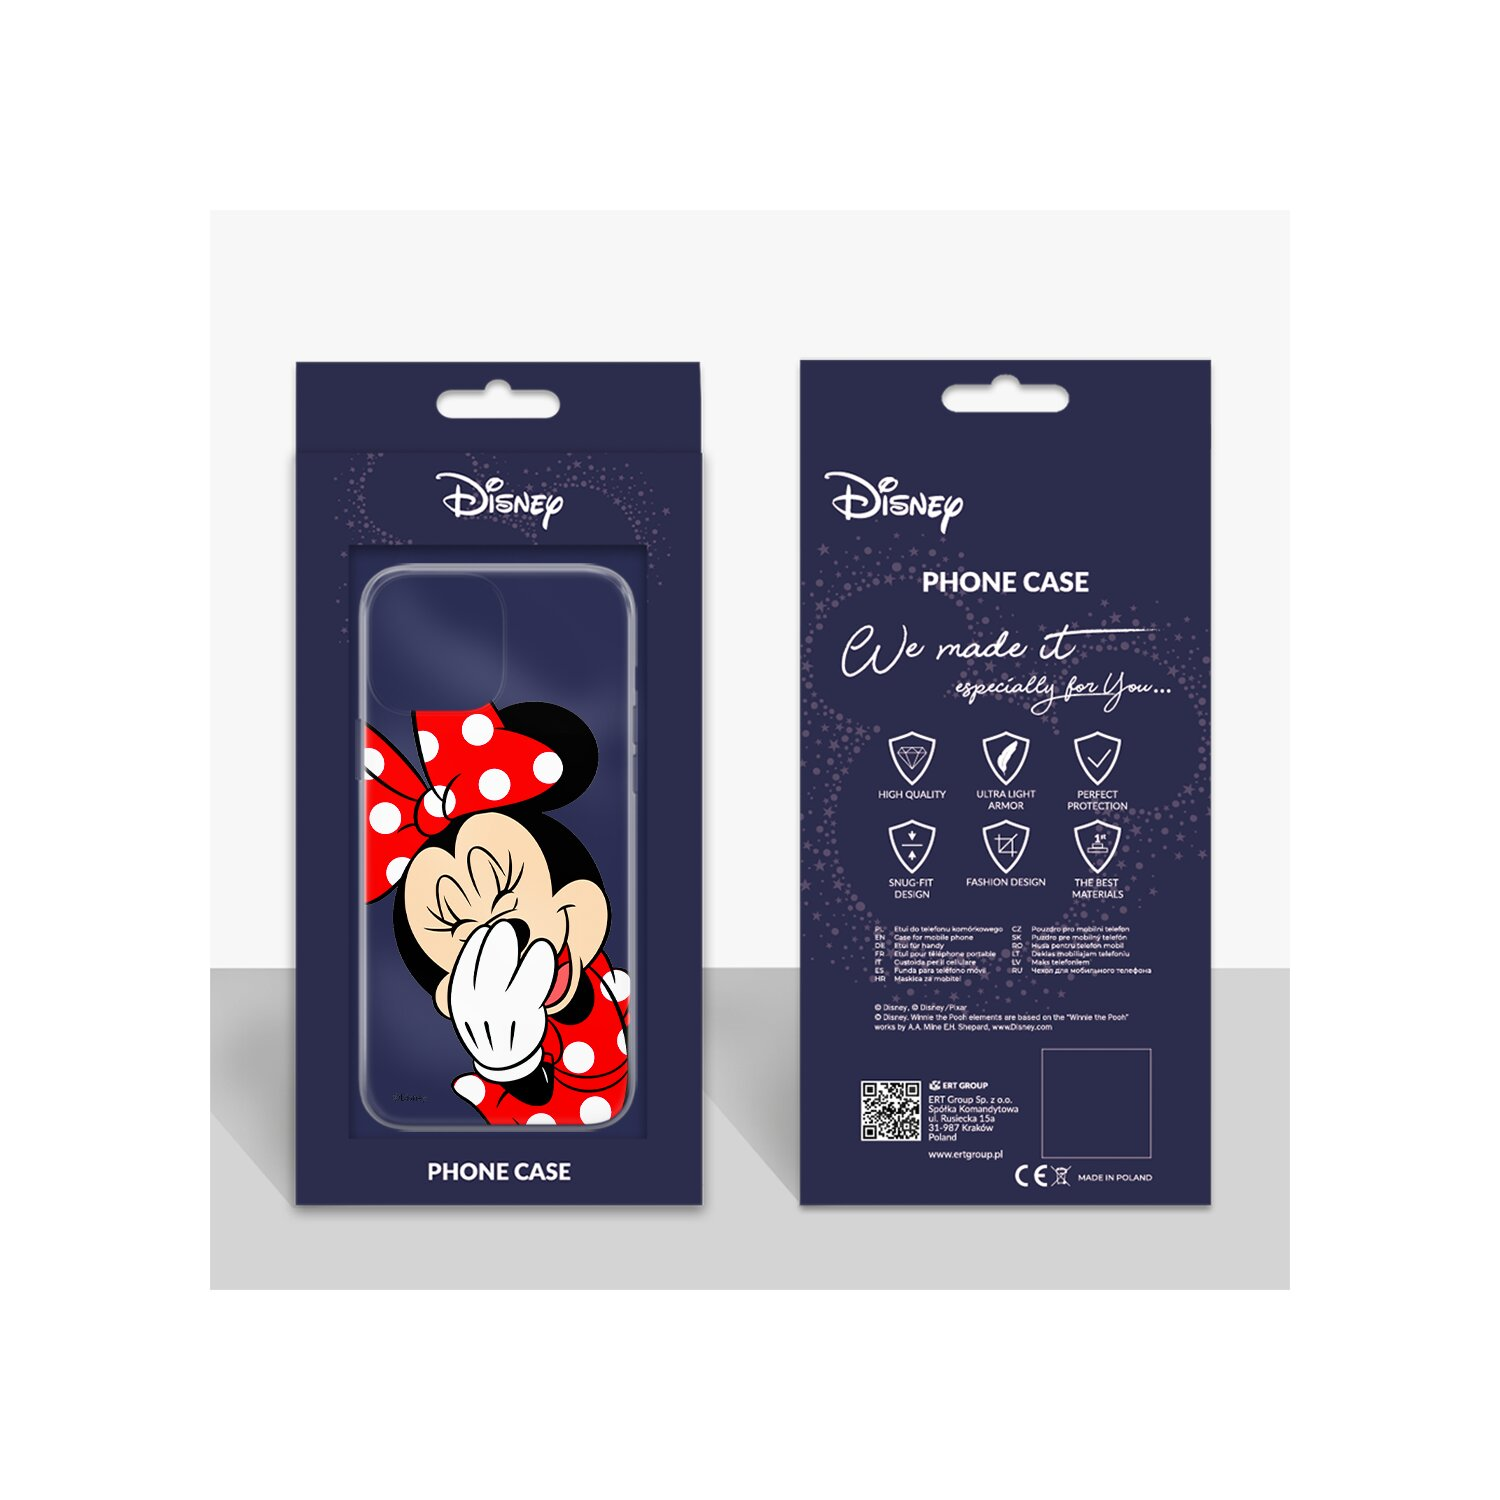 DISNEY Mickey 006 Partial Print, Backcover, 15, Transparent iPhone Apple